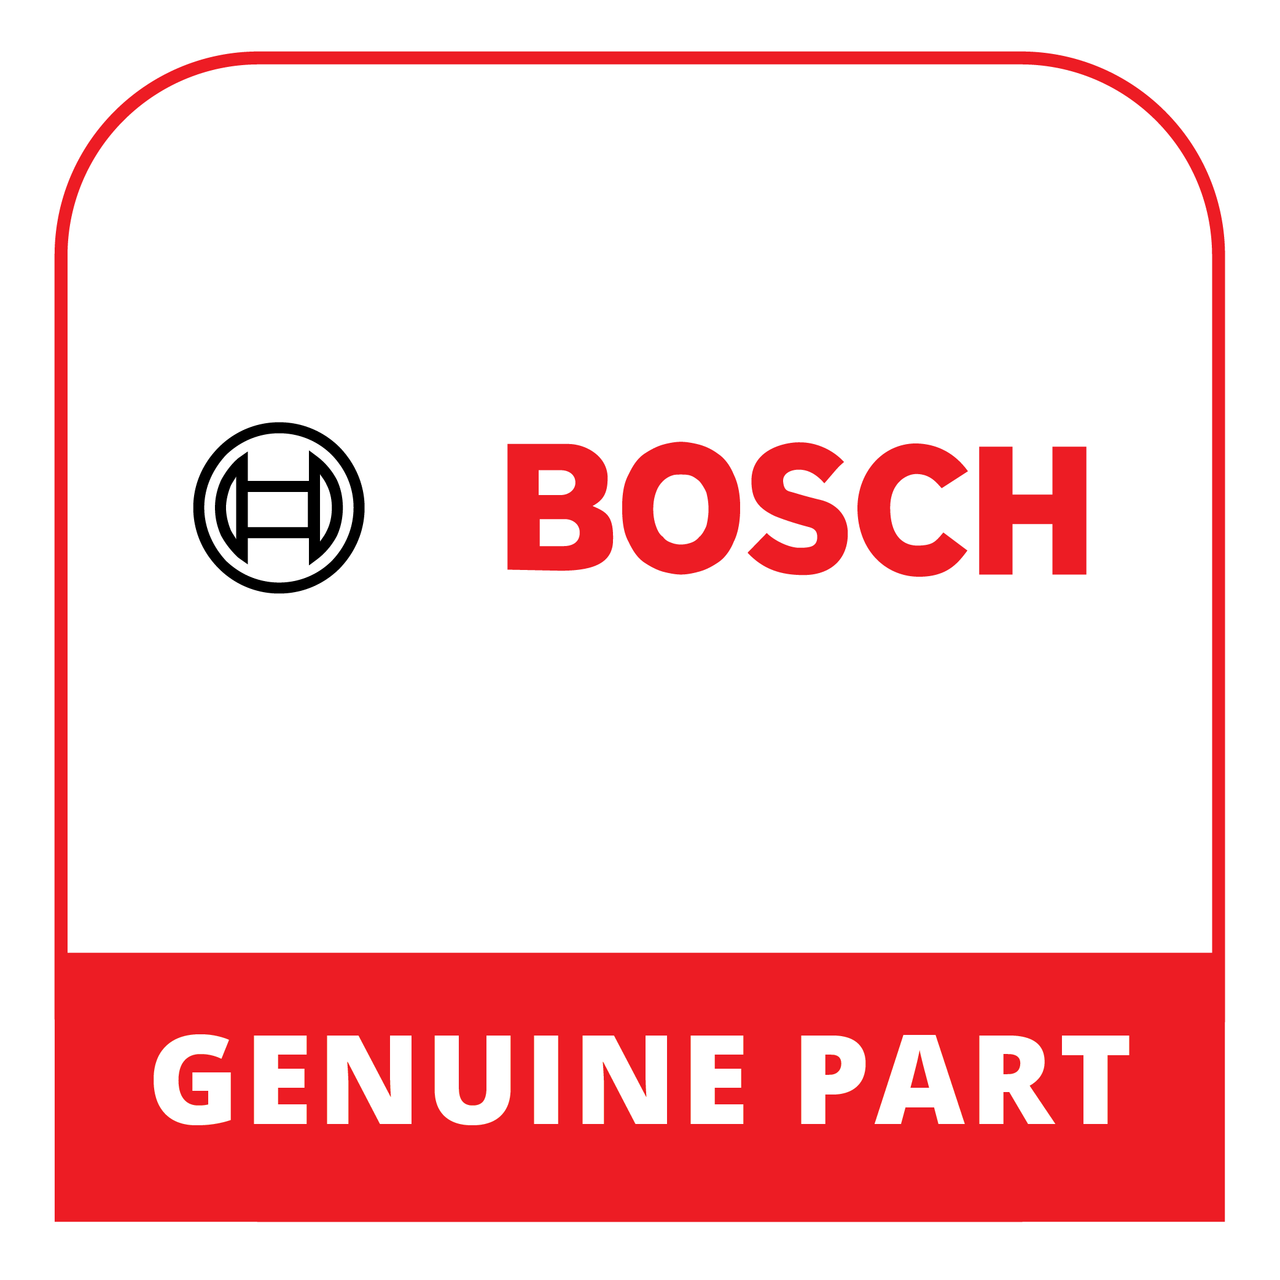 Bosch (Thermador) 20000140 - Manifold - Genuine Bosch (Thermador) Part